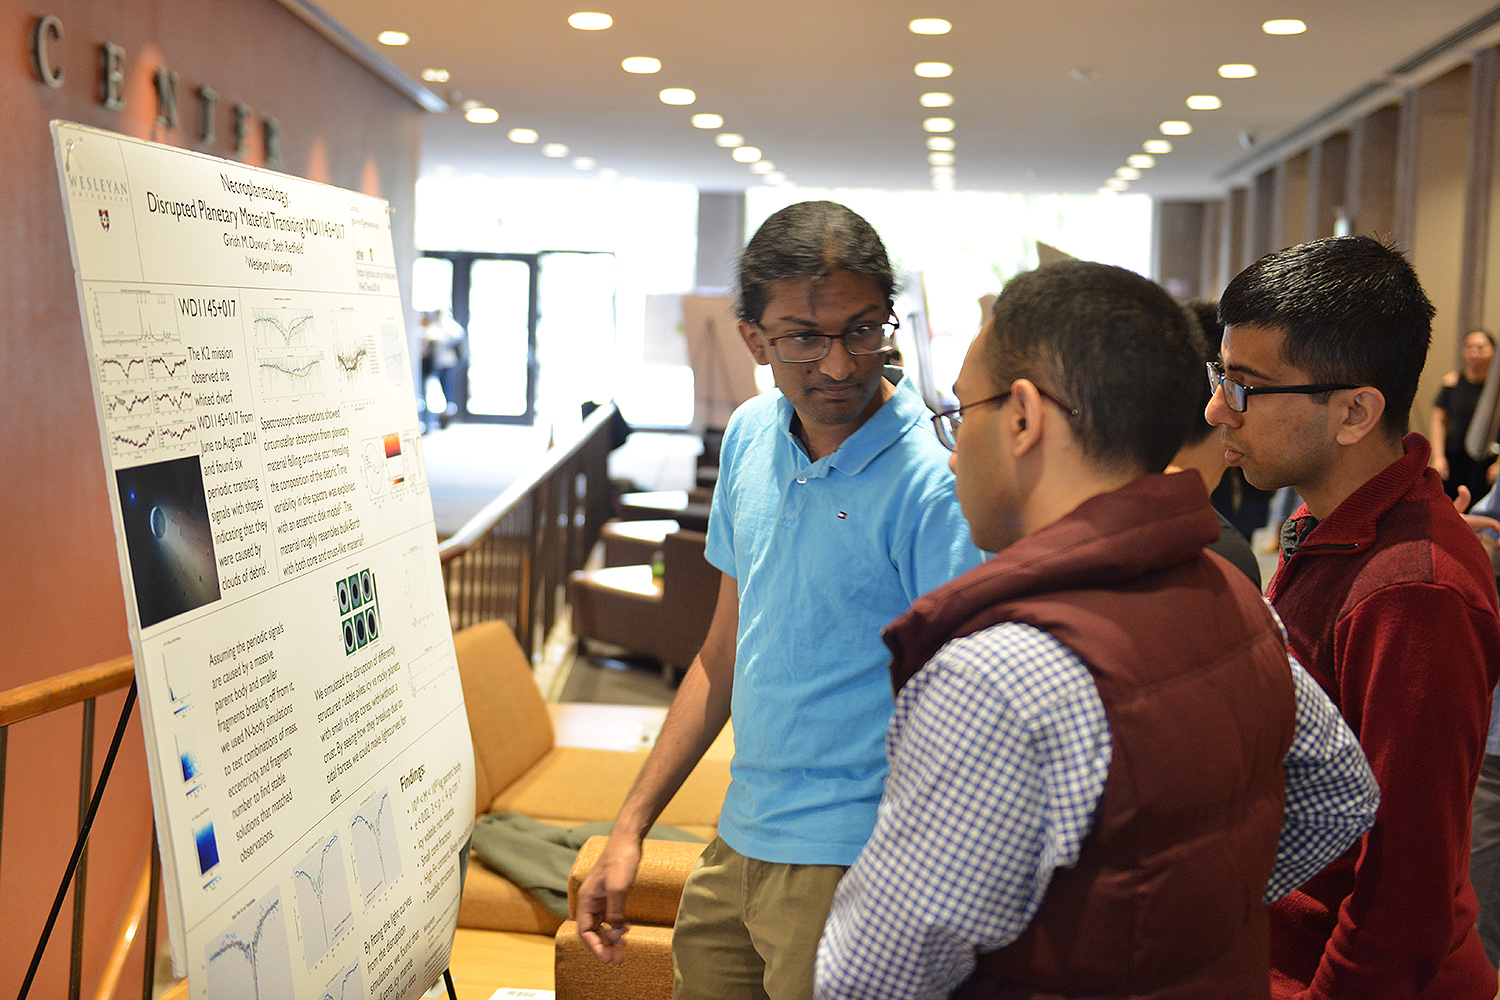 Girish Duvvuri '17 presented his research titled "Necroplanetology: Disrupted Planetary Material Transiting WDII45+017." His advisor is Seth Redfield, associate professor of astronomy.